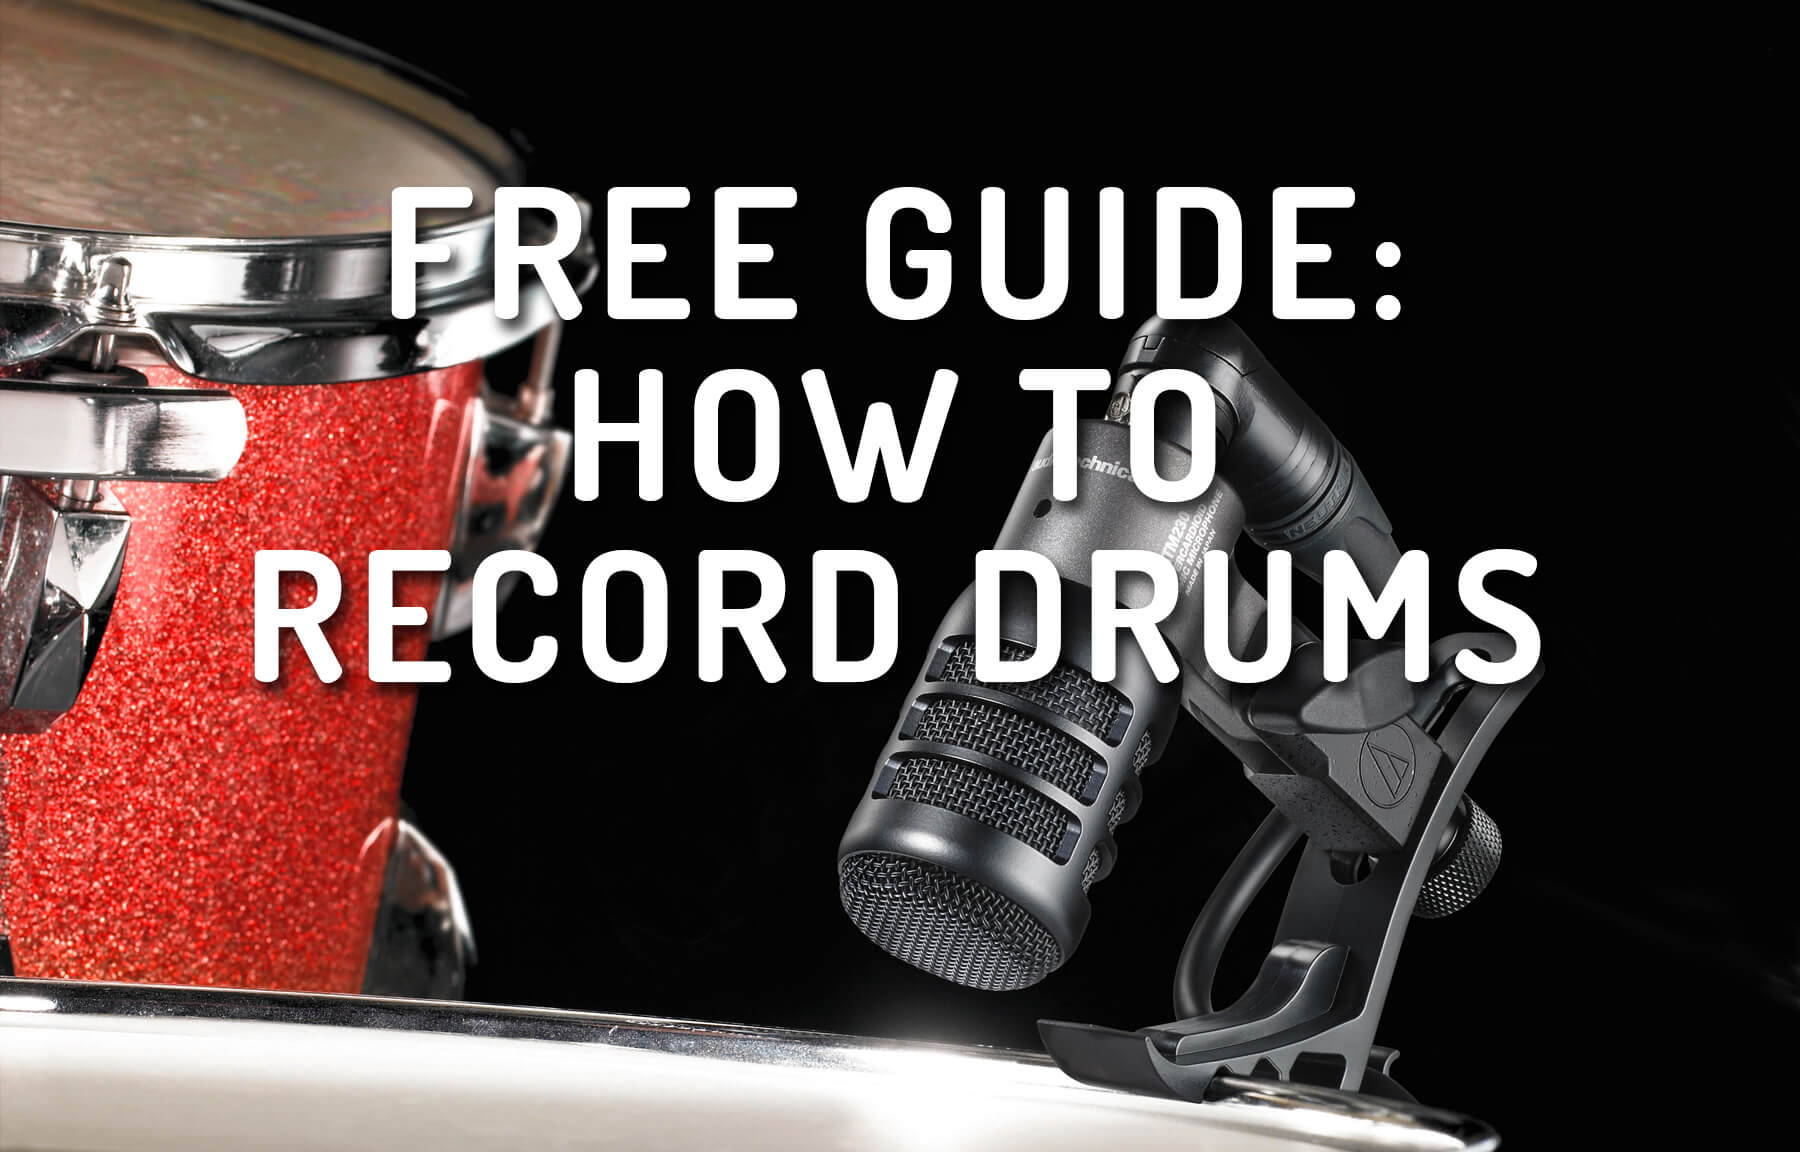 Performer’s FREE Guide to Miking and Recording Drums